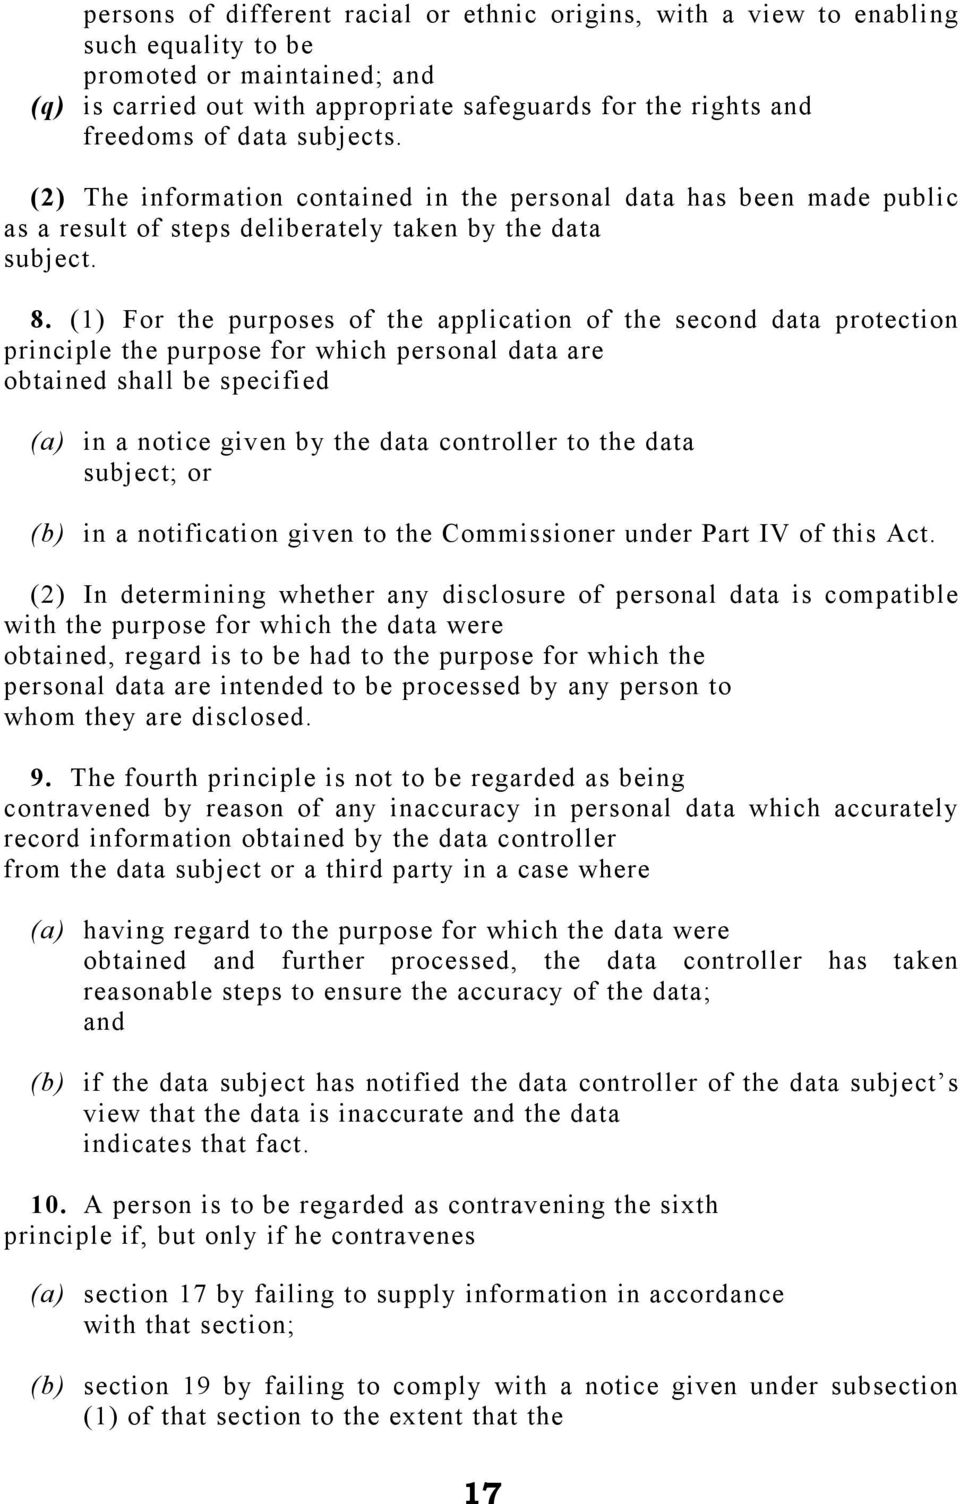 (1) For the purposes of the application of the second data protection principle the purpose for which personal data are obtained shall be specified (a) in a notice given by the data controller to the